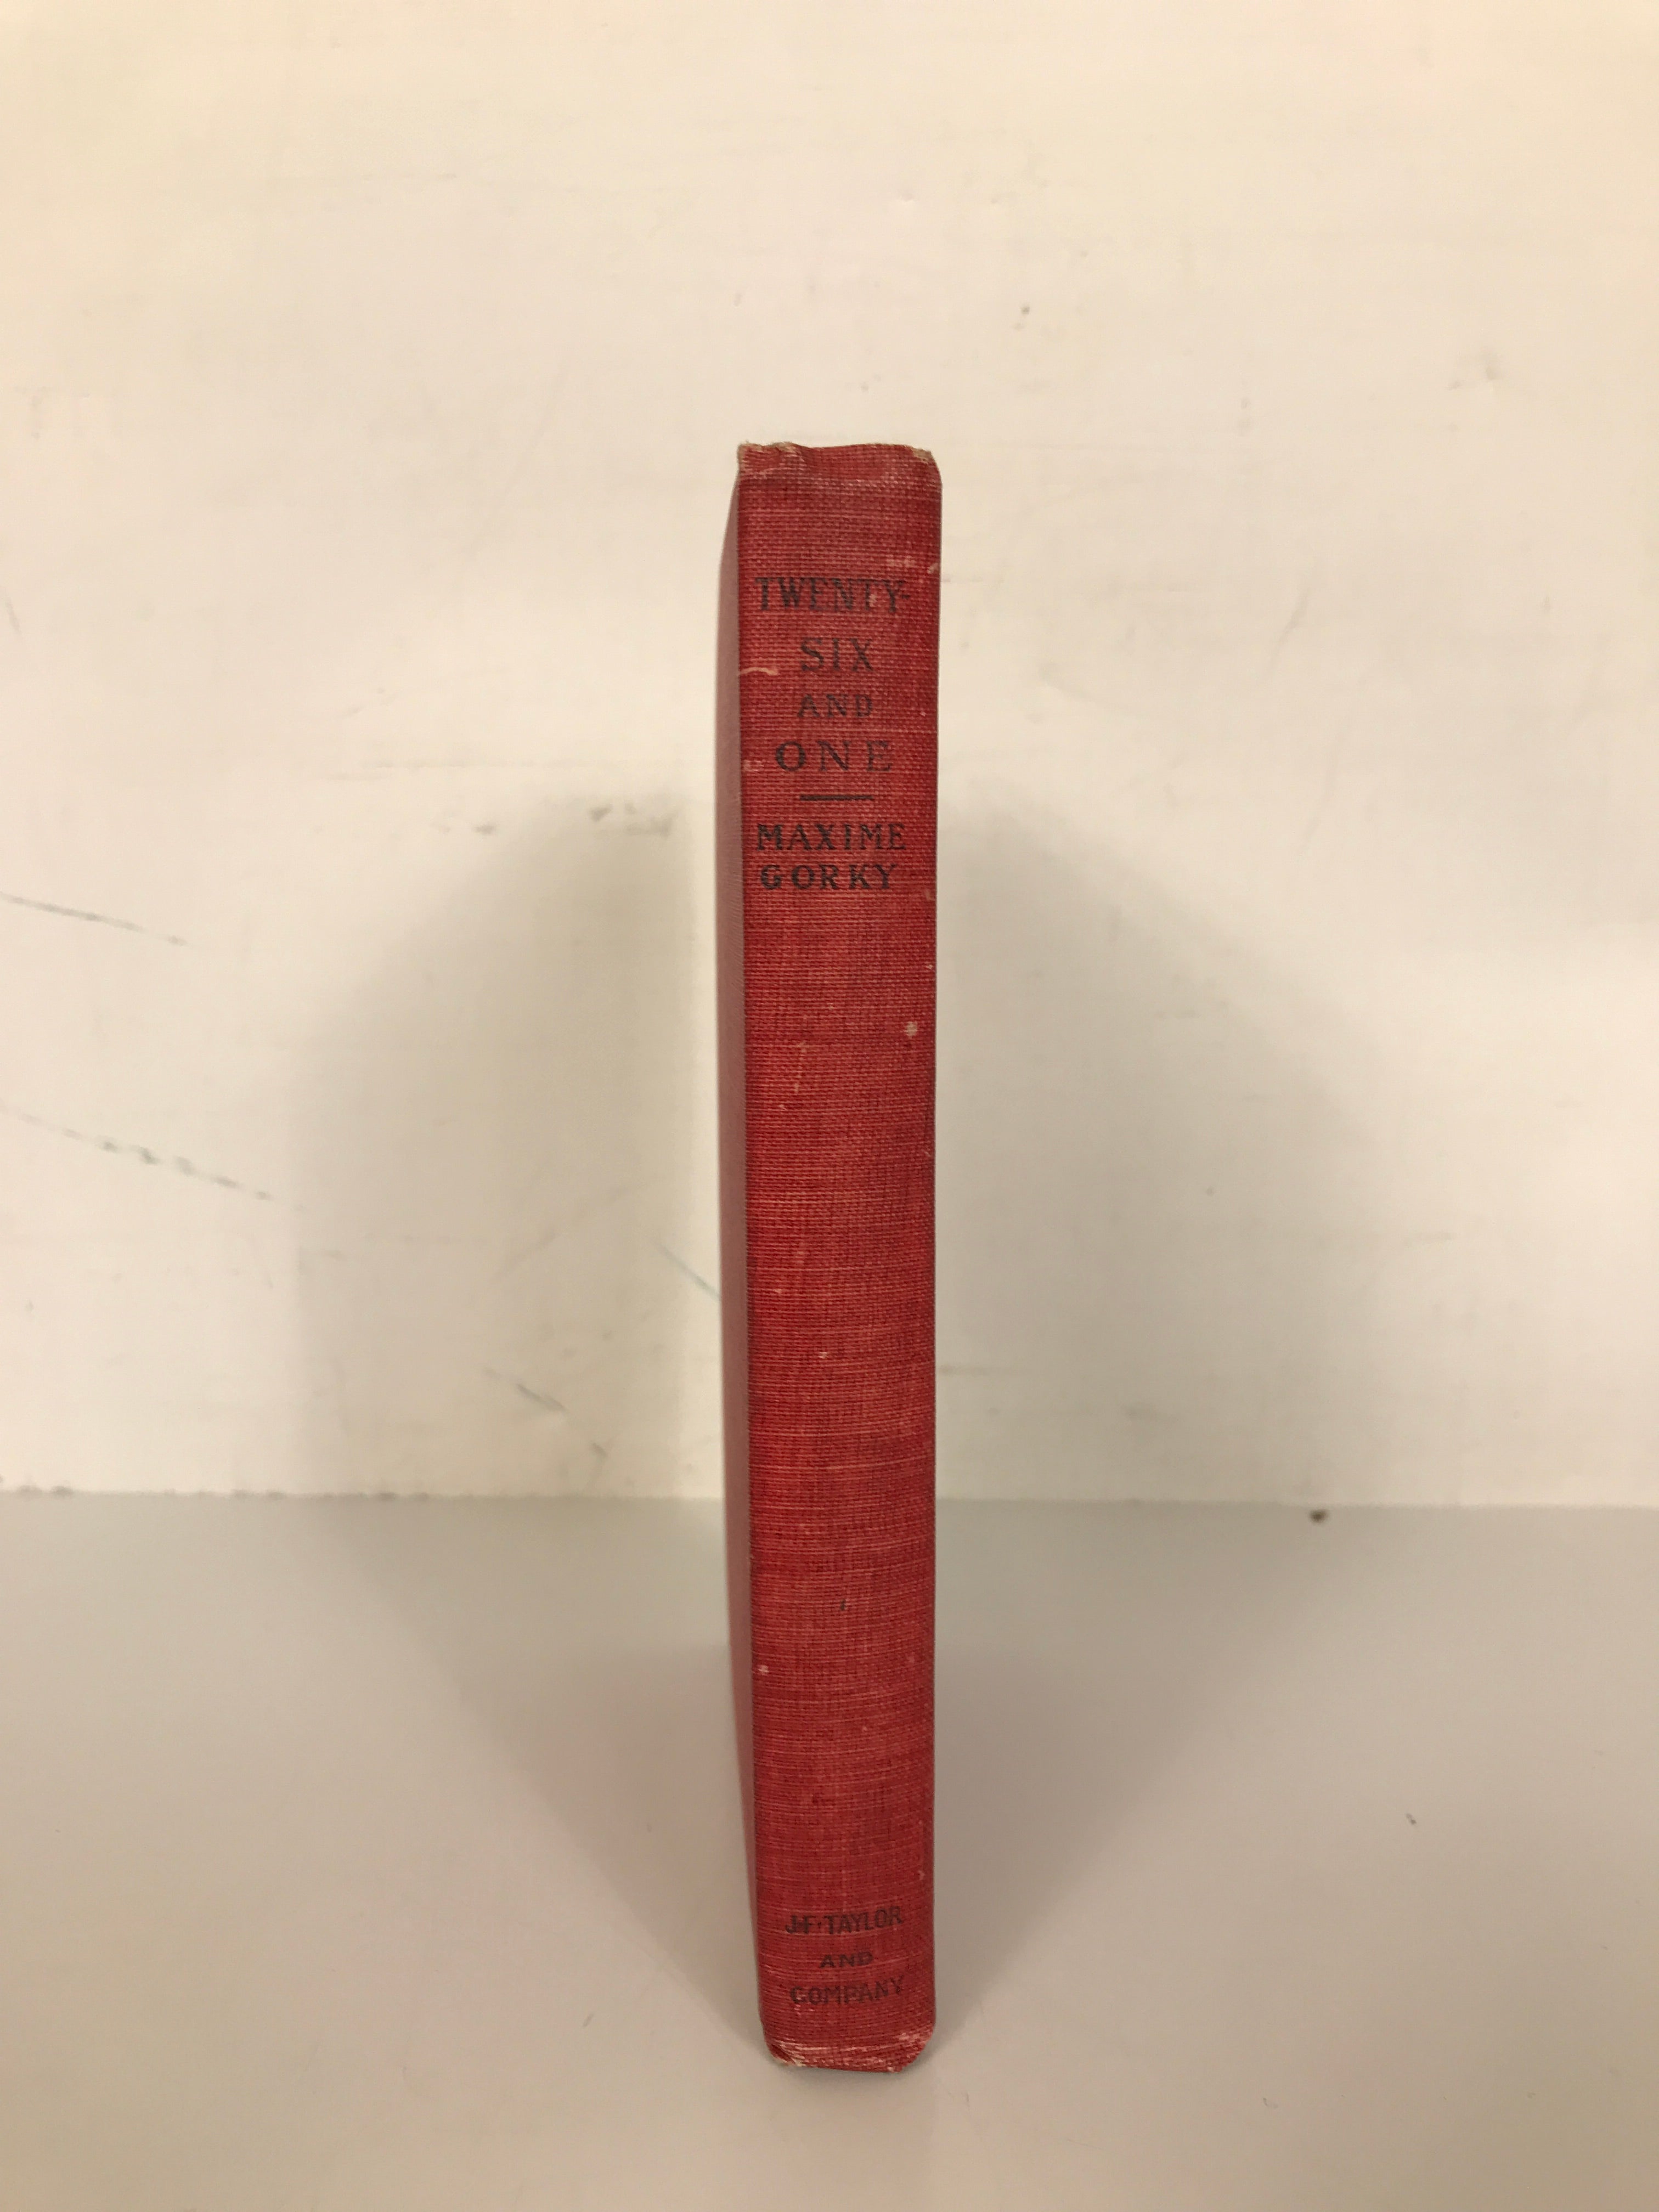 Twenty-six and One by Maxime Gorky (1902) Translated from the Russian Antique HC